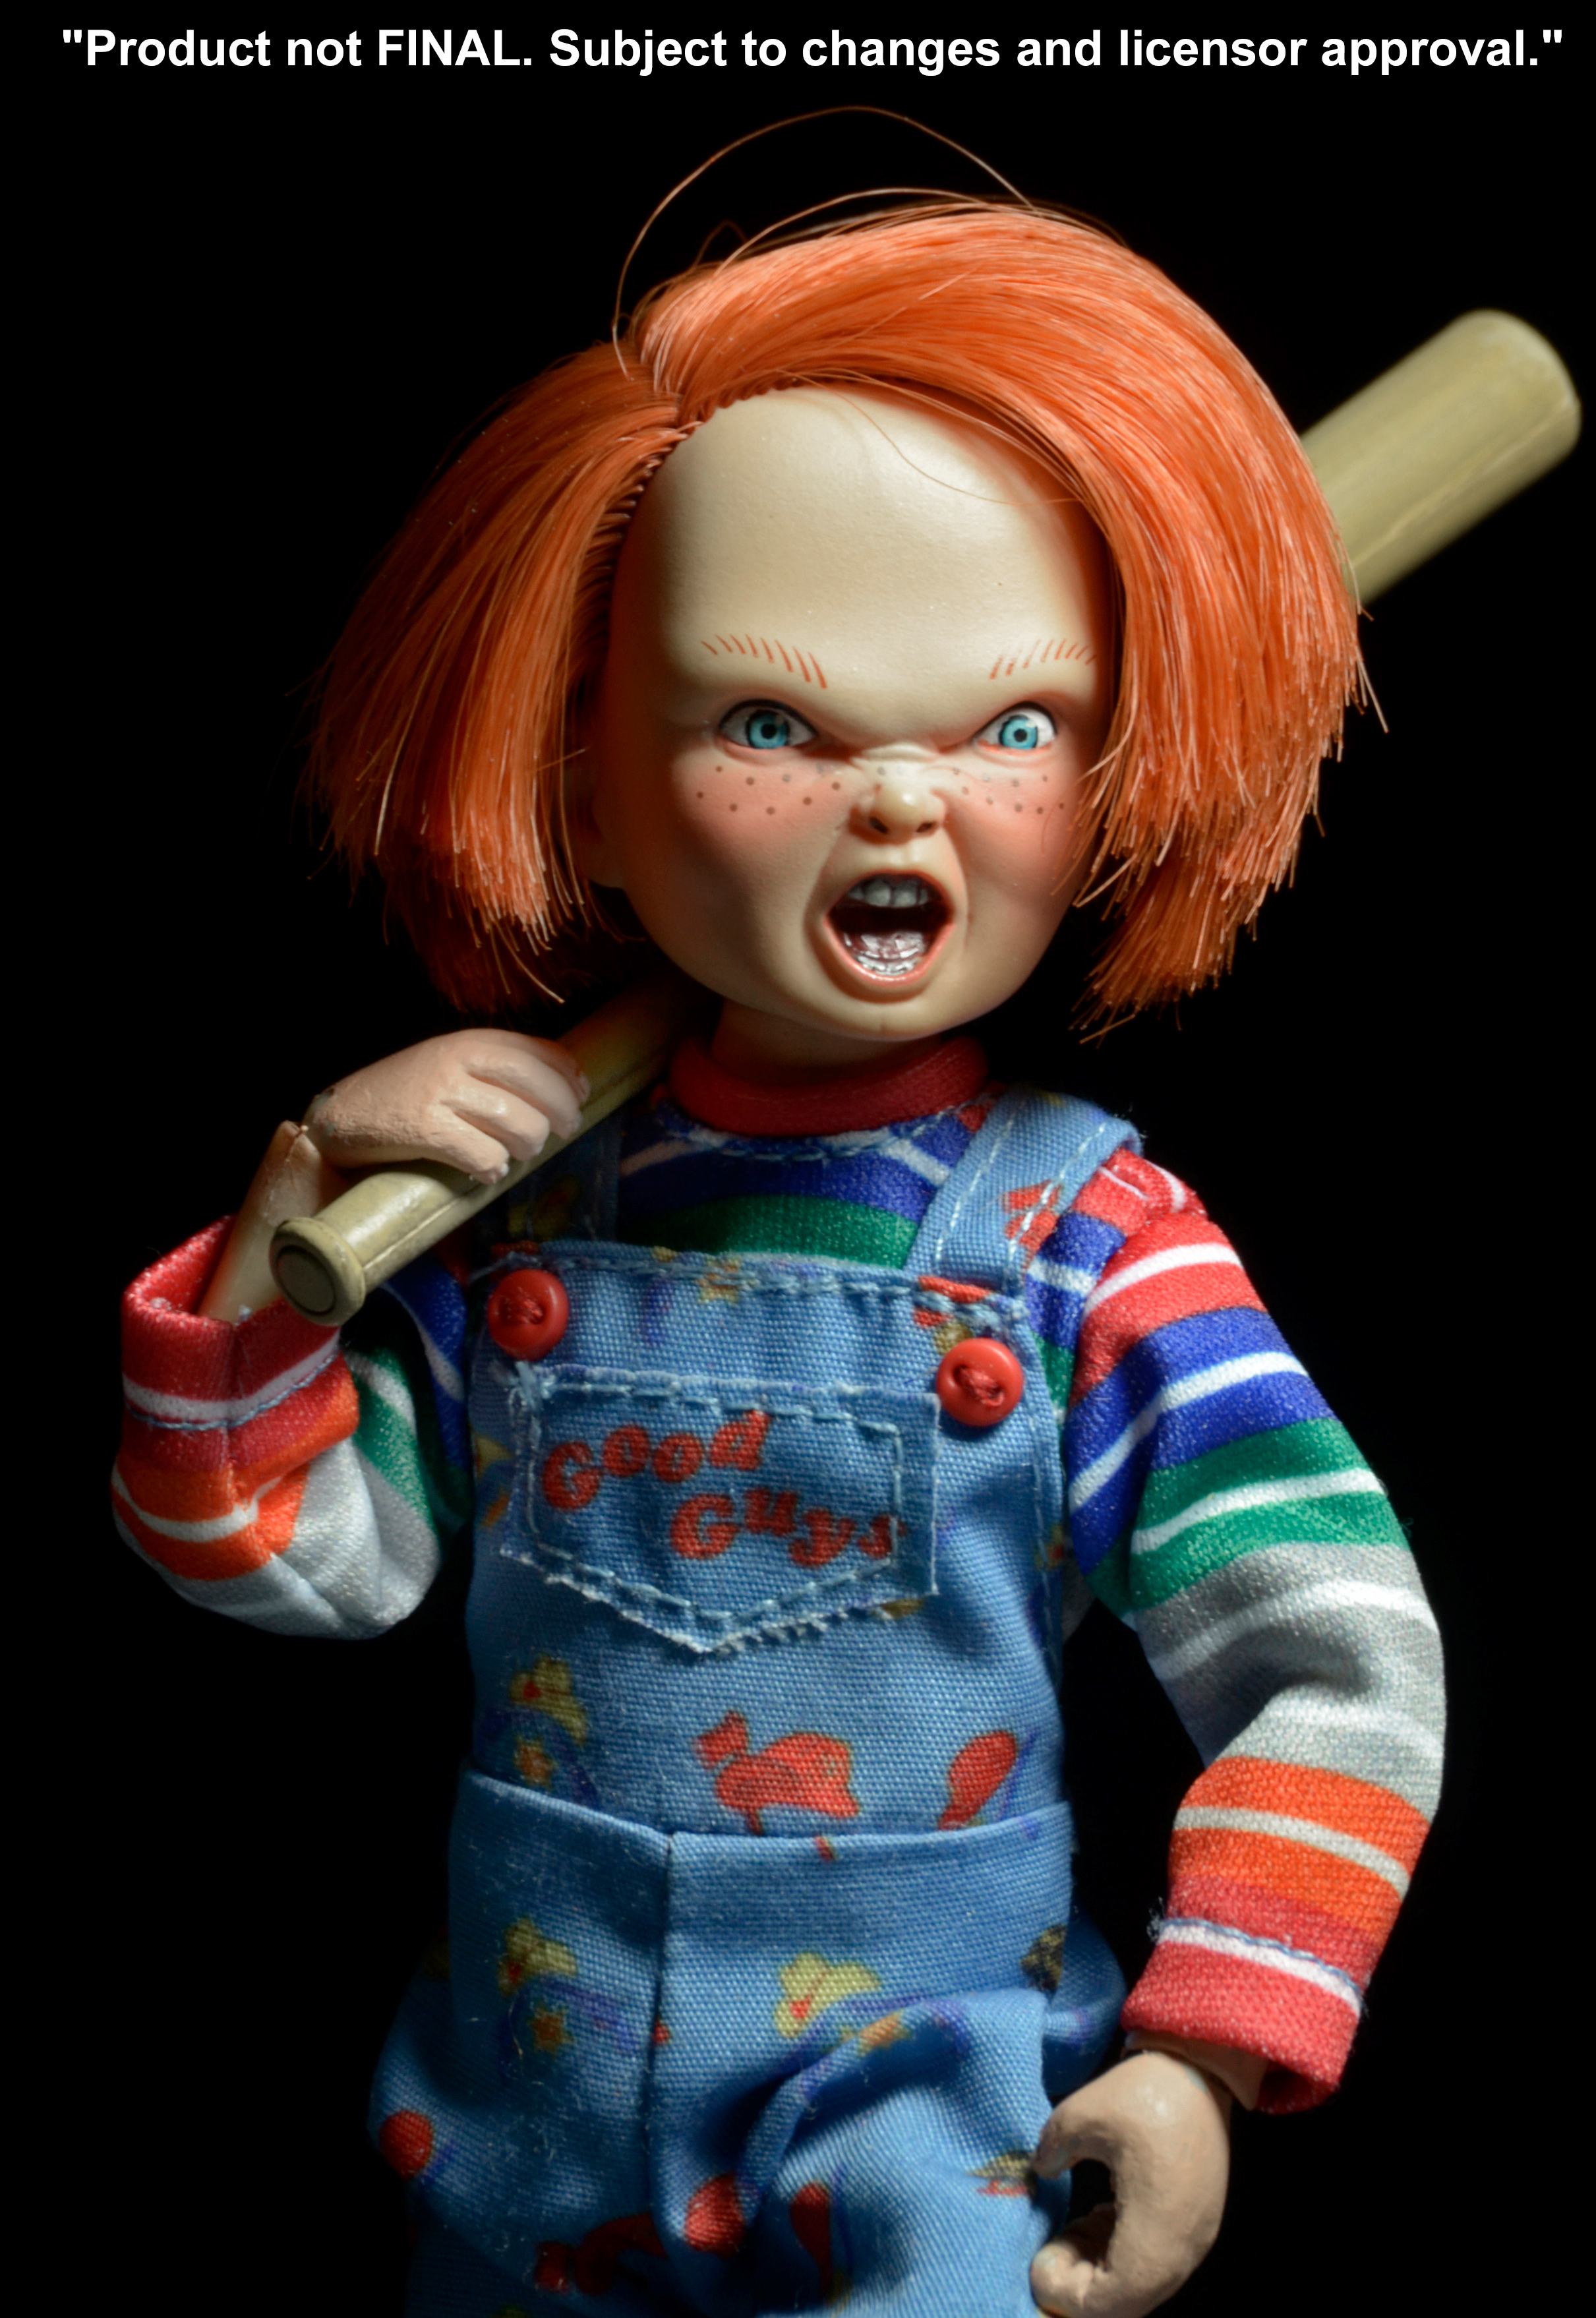 Childs-Play-Chucky-8-Inch-Cloth-Retro-Action-Figure-06